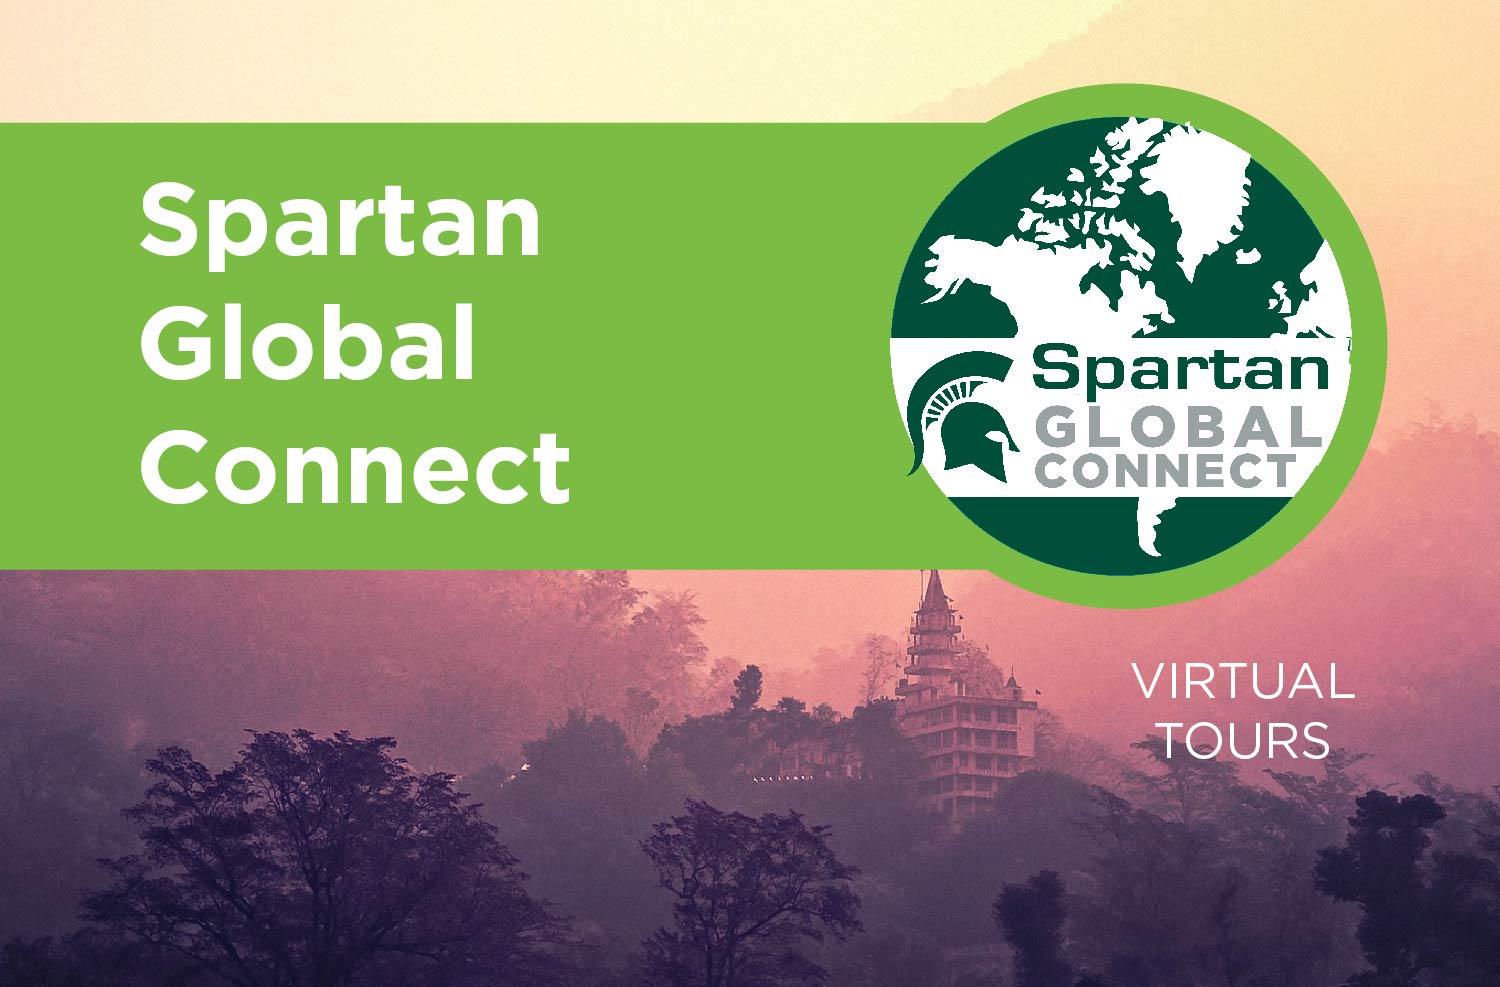 Spartan Global Connect